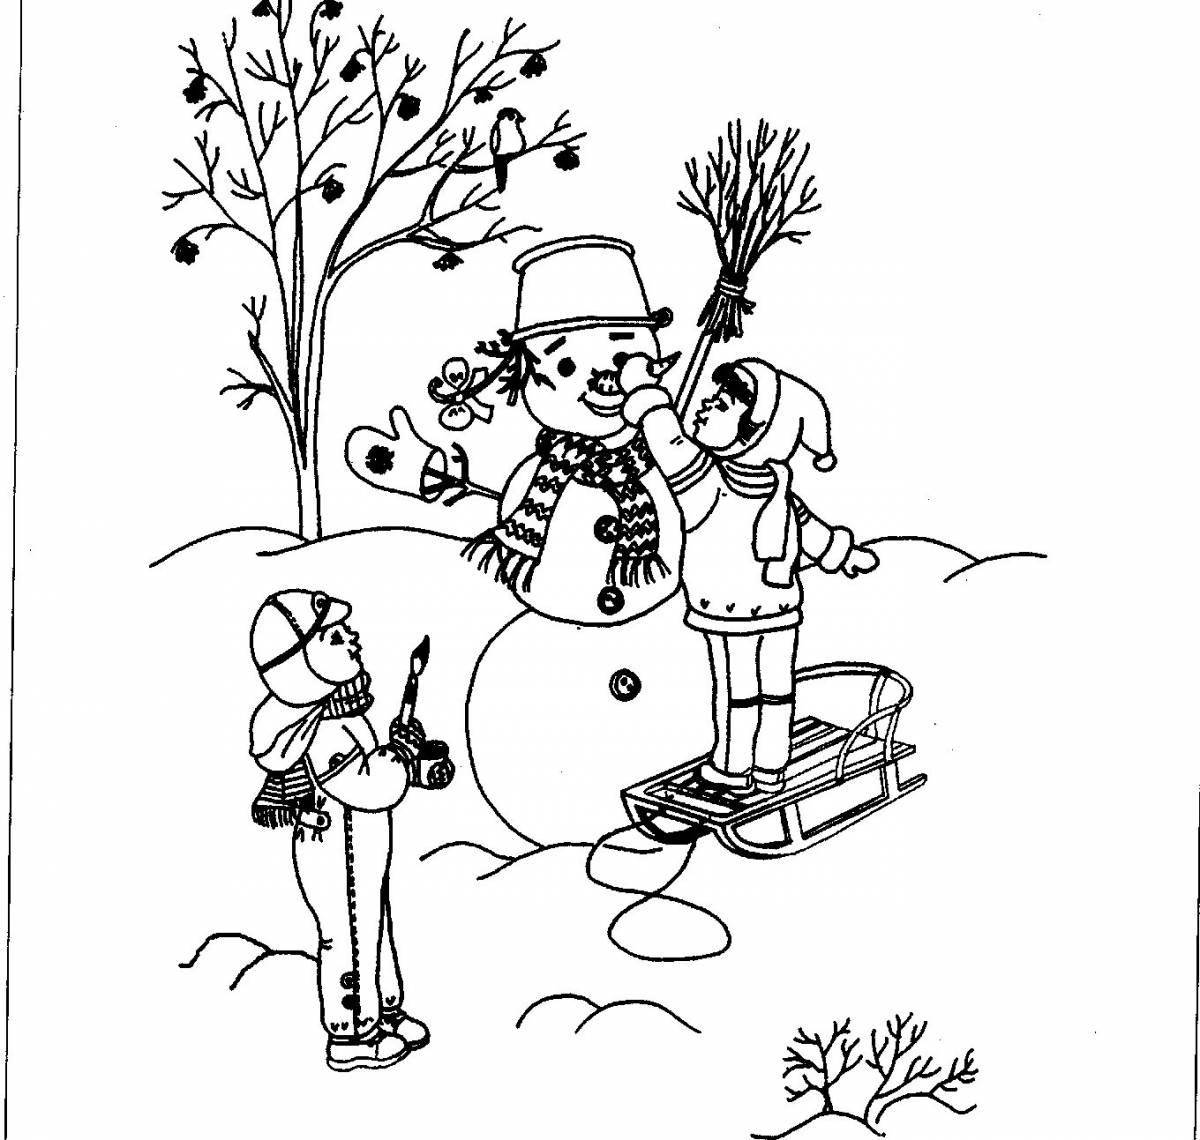 Fabulous coloring pages signs of winter for kids